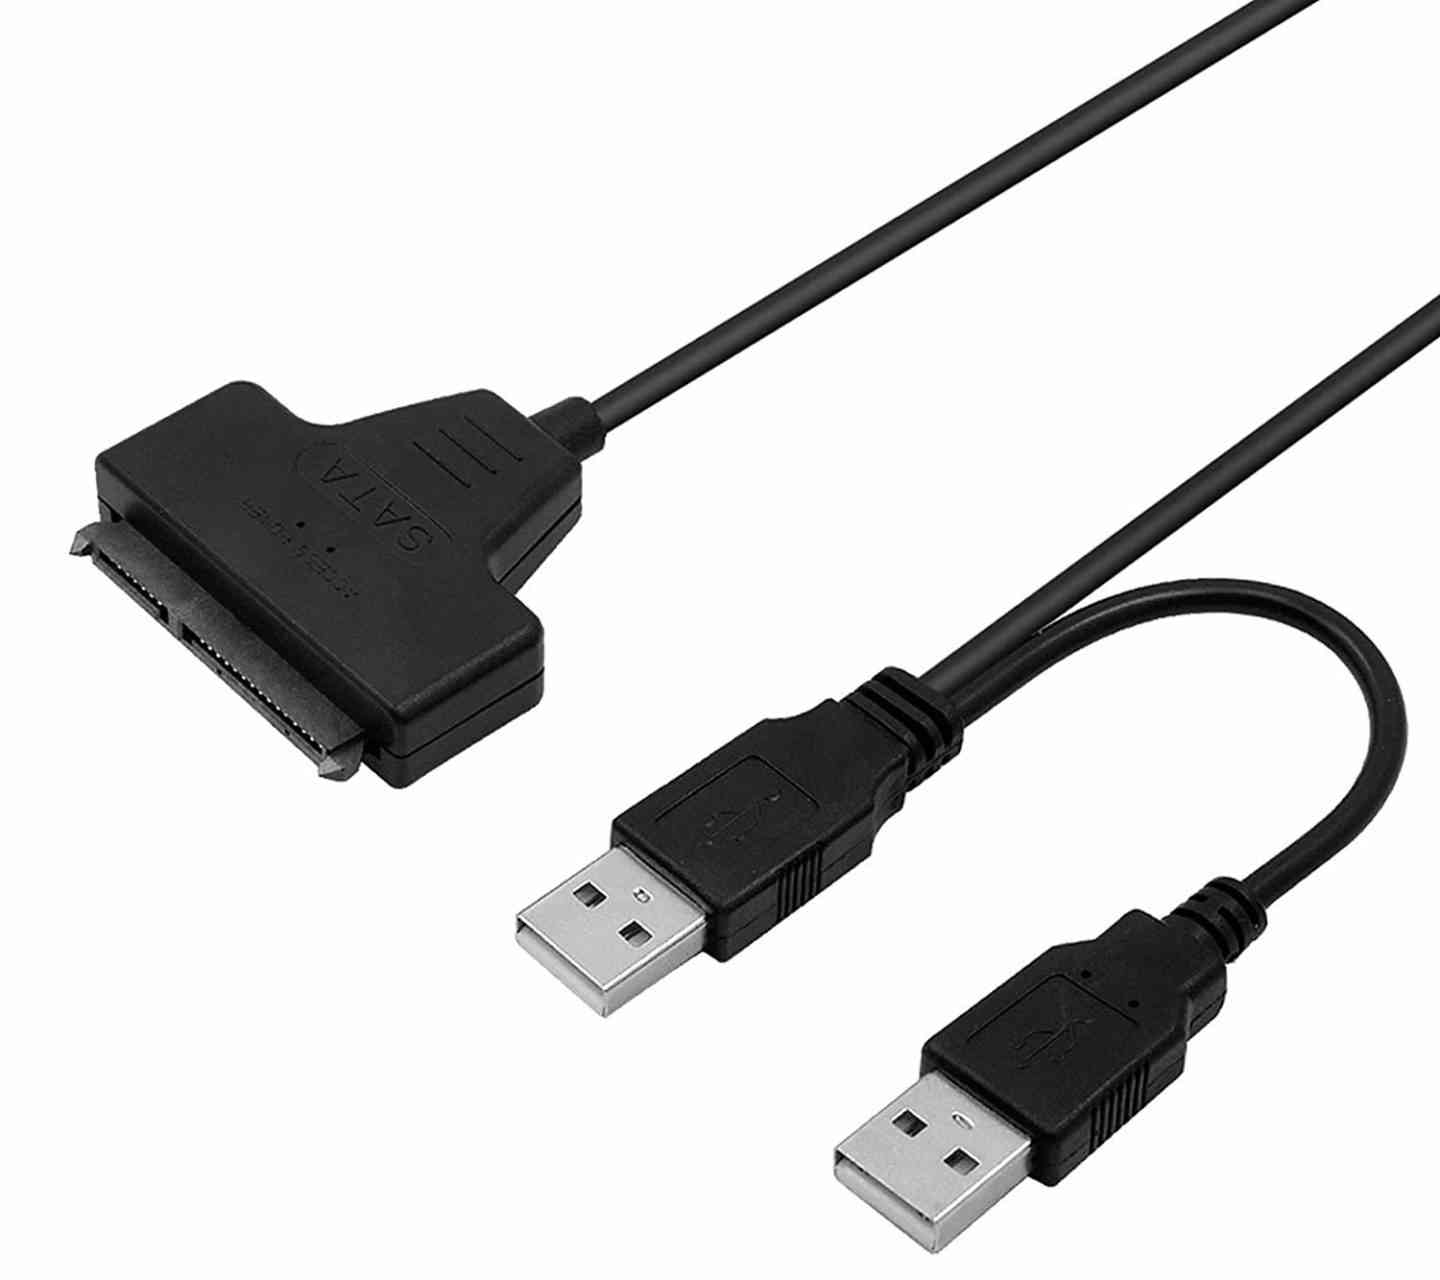 USB 2.0 to SATA Cable